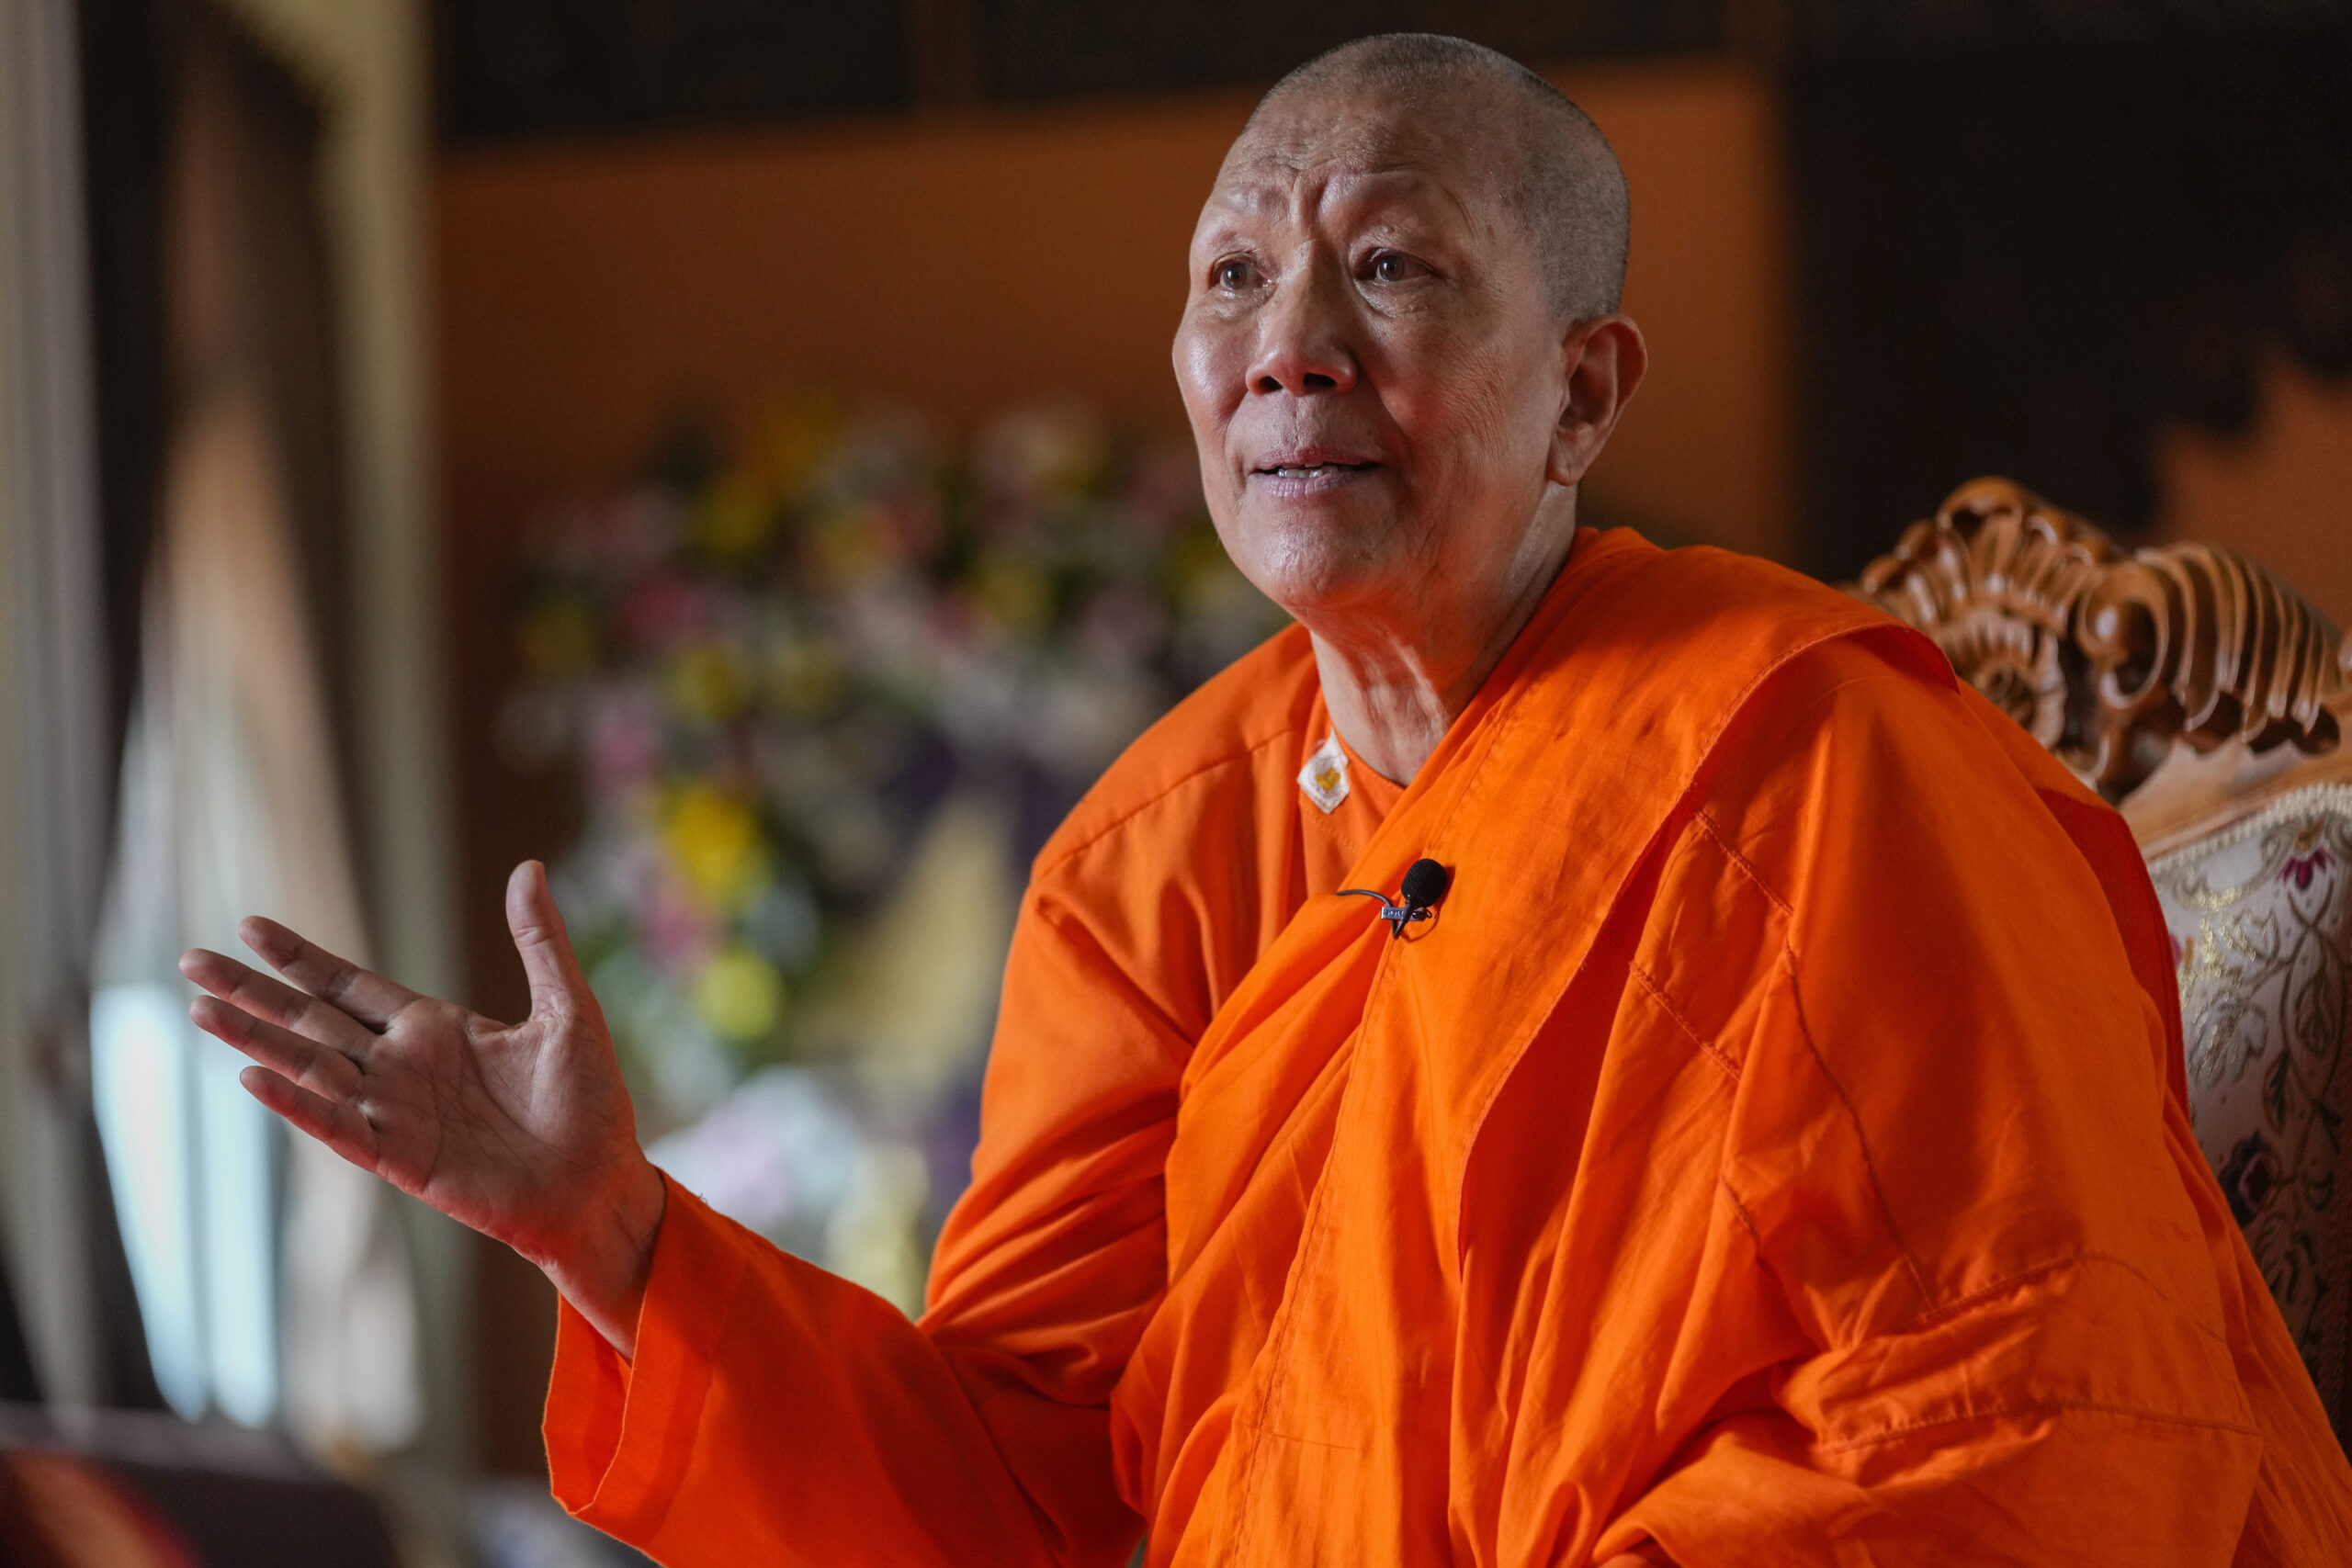 Venerable Dhammananda speaks during an interview in the Songdhammakalyani monastery, in Nakhon Pathom province on Sunday, Nov. 21, 2021. Dhammananda renounced her family life and a prestigious academic career in Thailand to follow the path of the Buddha. She then defied her homeland’s unequal status of women in Buddhist practice by traveling to Sri Lanka to become Thailand’s first fully ordained nun in Theravada, one of the oldest forms of Buddhism. (AP Photo/Sakchai Lalit